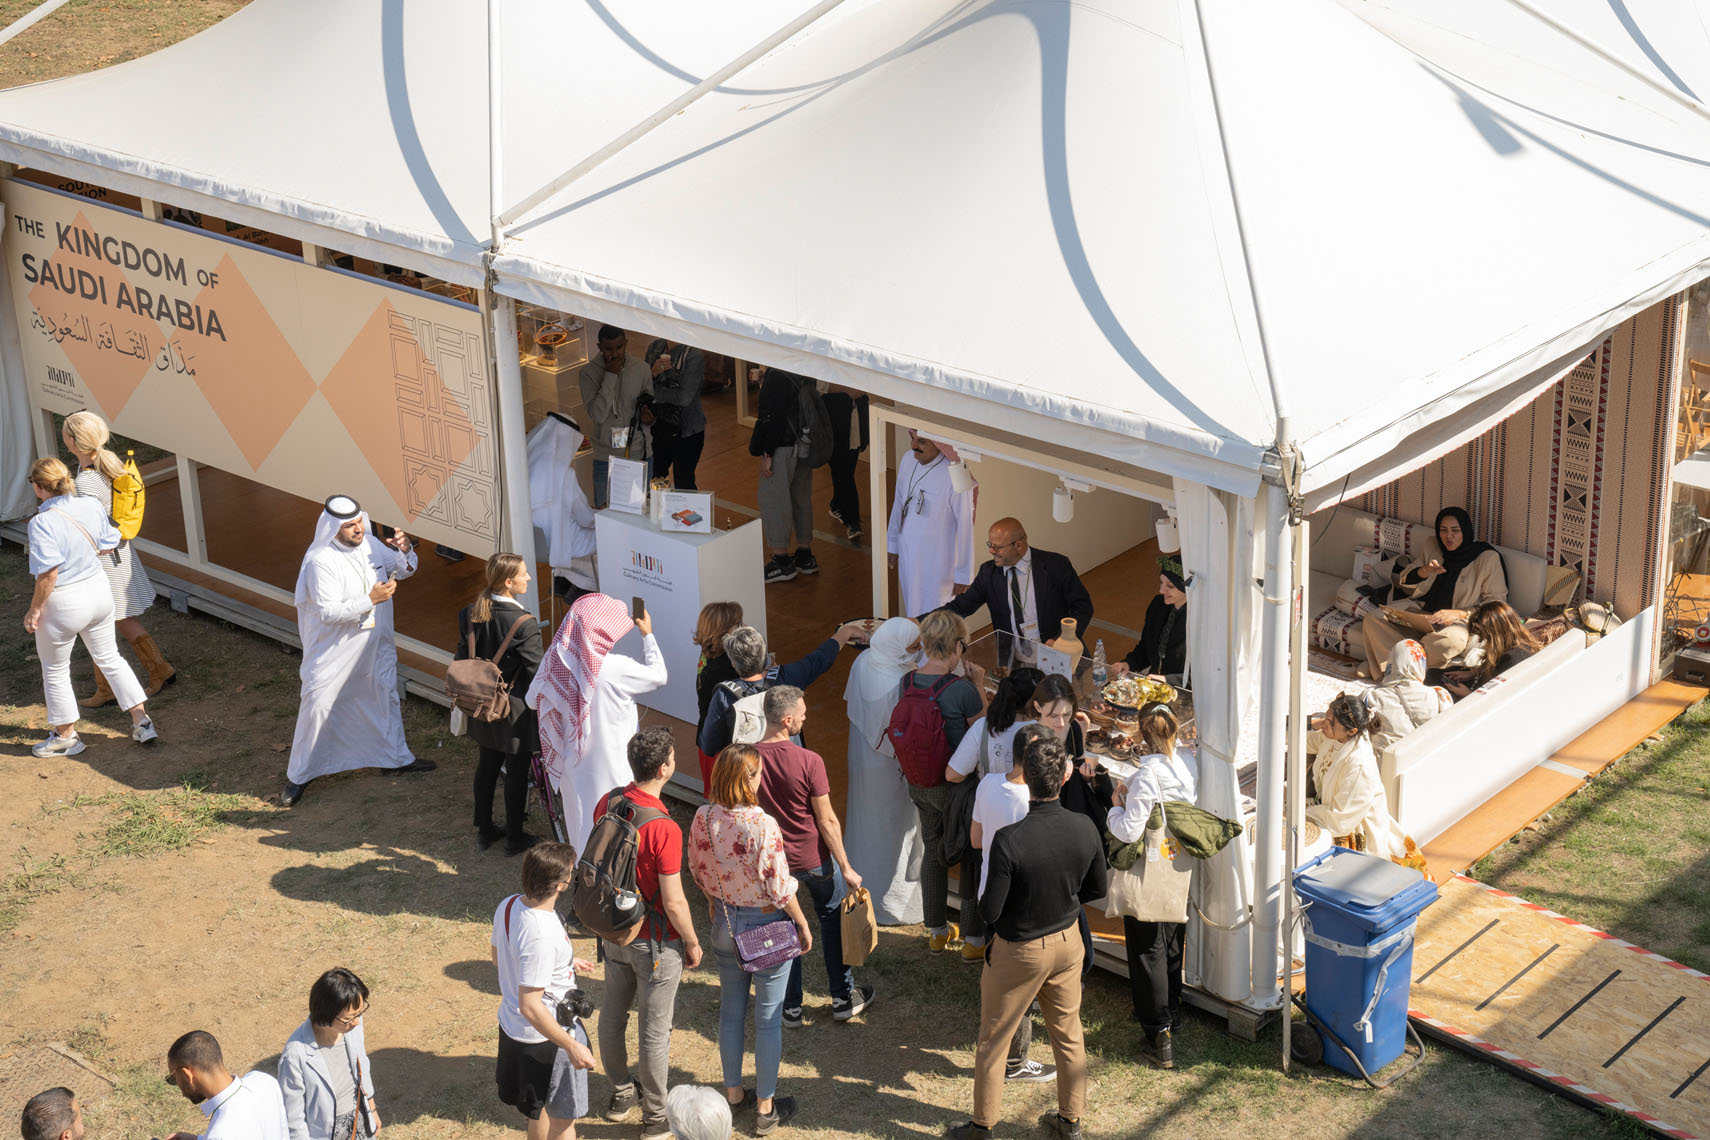 The Saudi Culinary Arts Commission hosted a pavilion at  Terra Madre featuring  some of the Kingdom’s unique dishes and indigenous food crops. Some of these included : Al-Hellya Dates, Melh Al-Qasab salt, Al-Samh Seeds, and  Saudi Khawlani Coffee Beans.